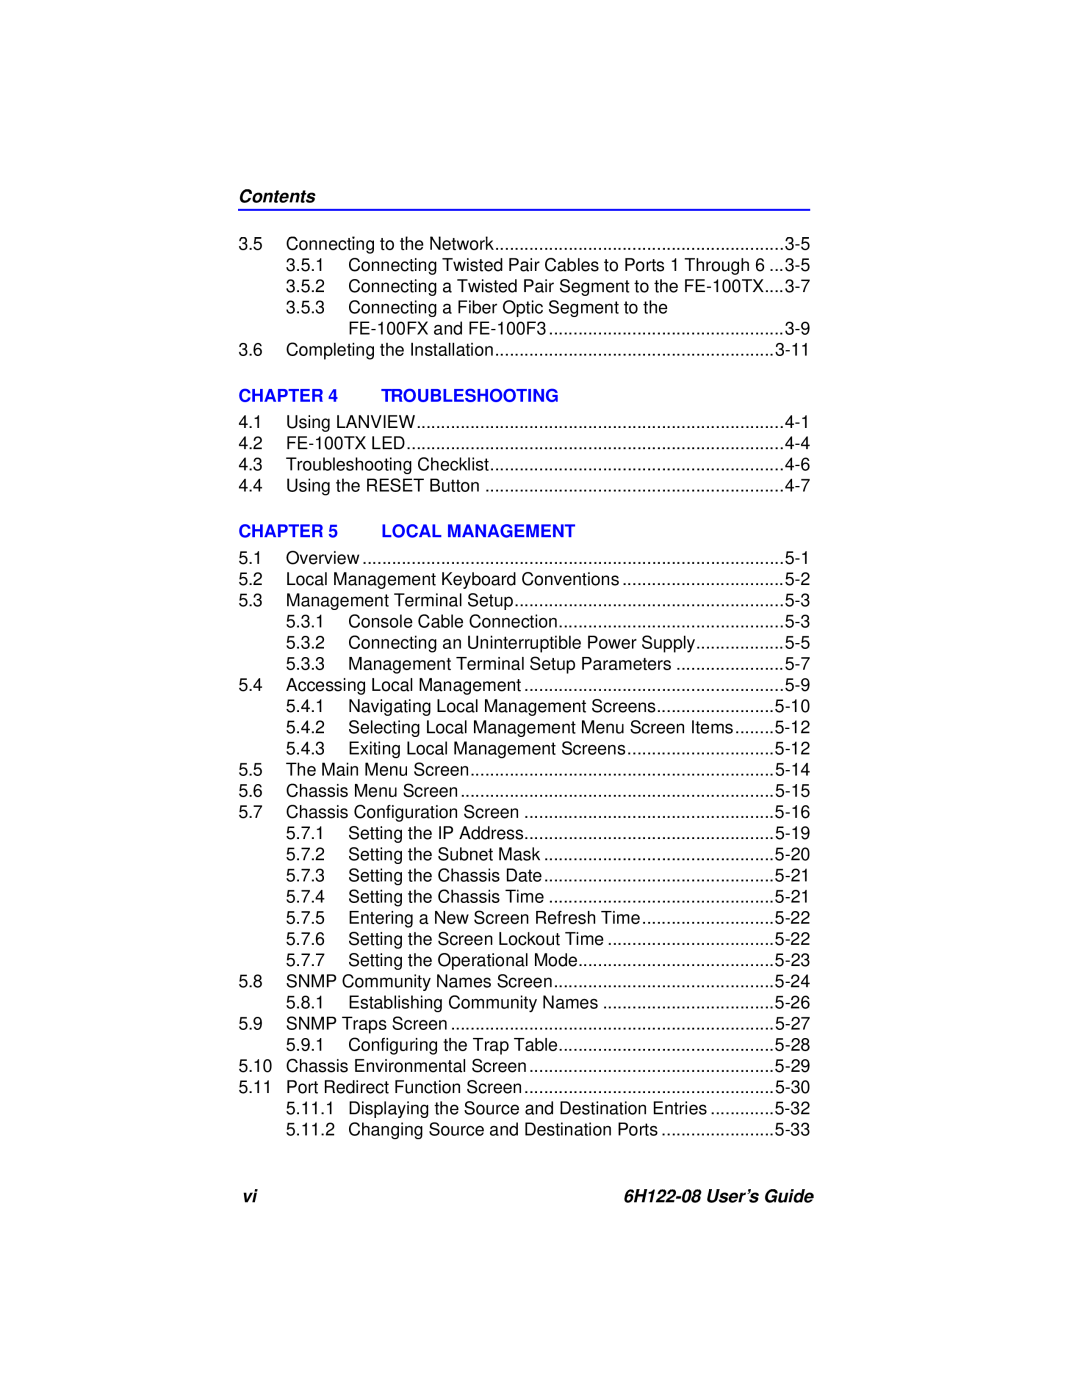 Cabletron Systems manual Contents, Chapter, Troubleshooting, Local Management, 6H122-08 User’s Guide 